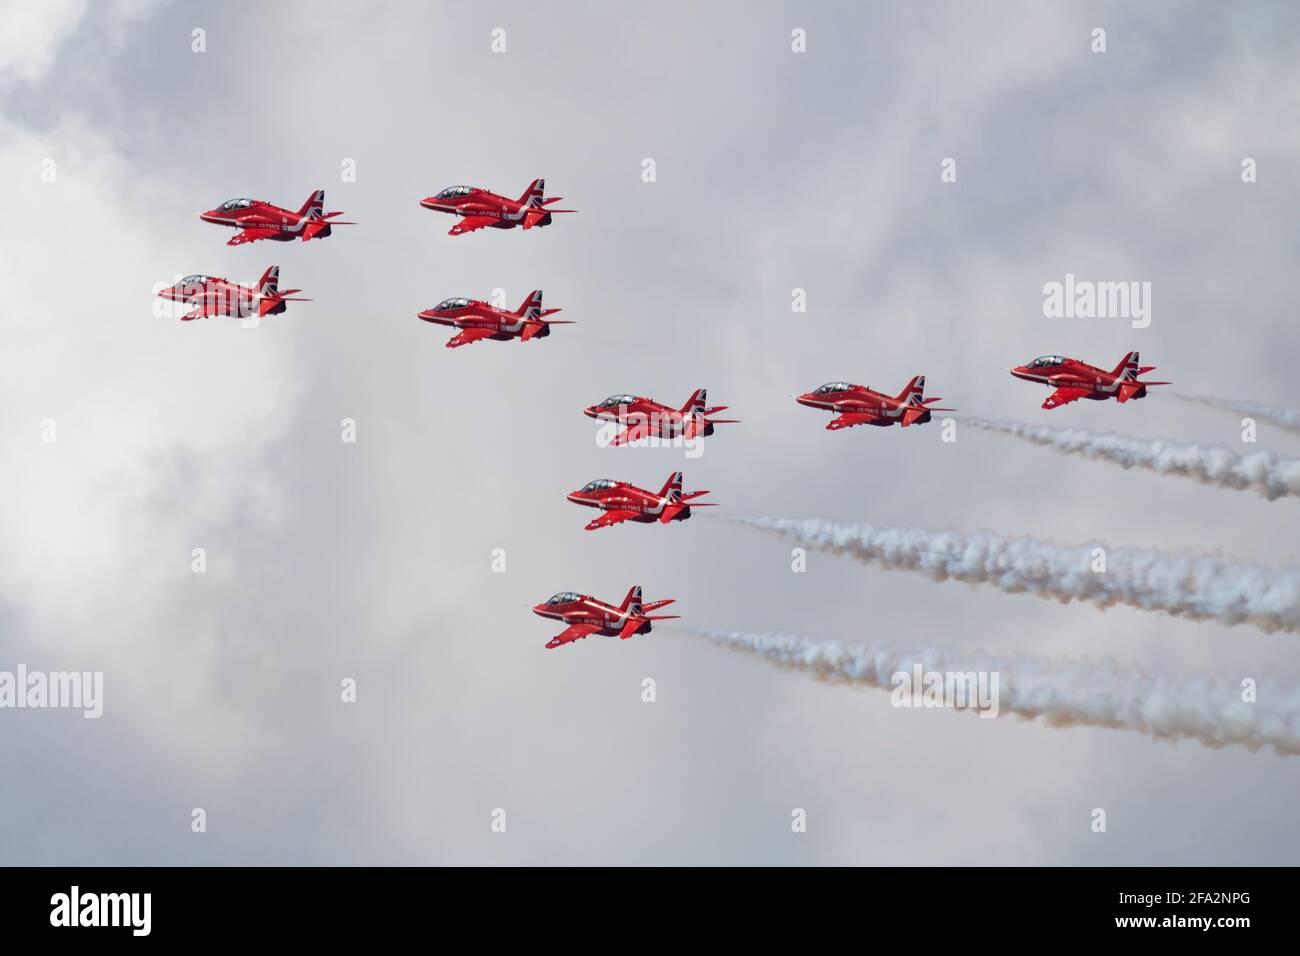 Royal Air Force aerobatic team Red Arrows with BAe Hawk T1A display for RIAT Royal International Air Tattoo 2018 airshow Stock Photo